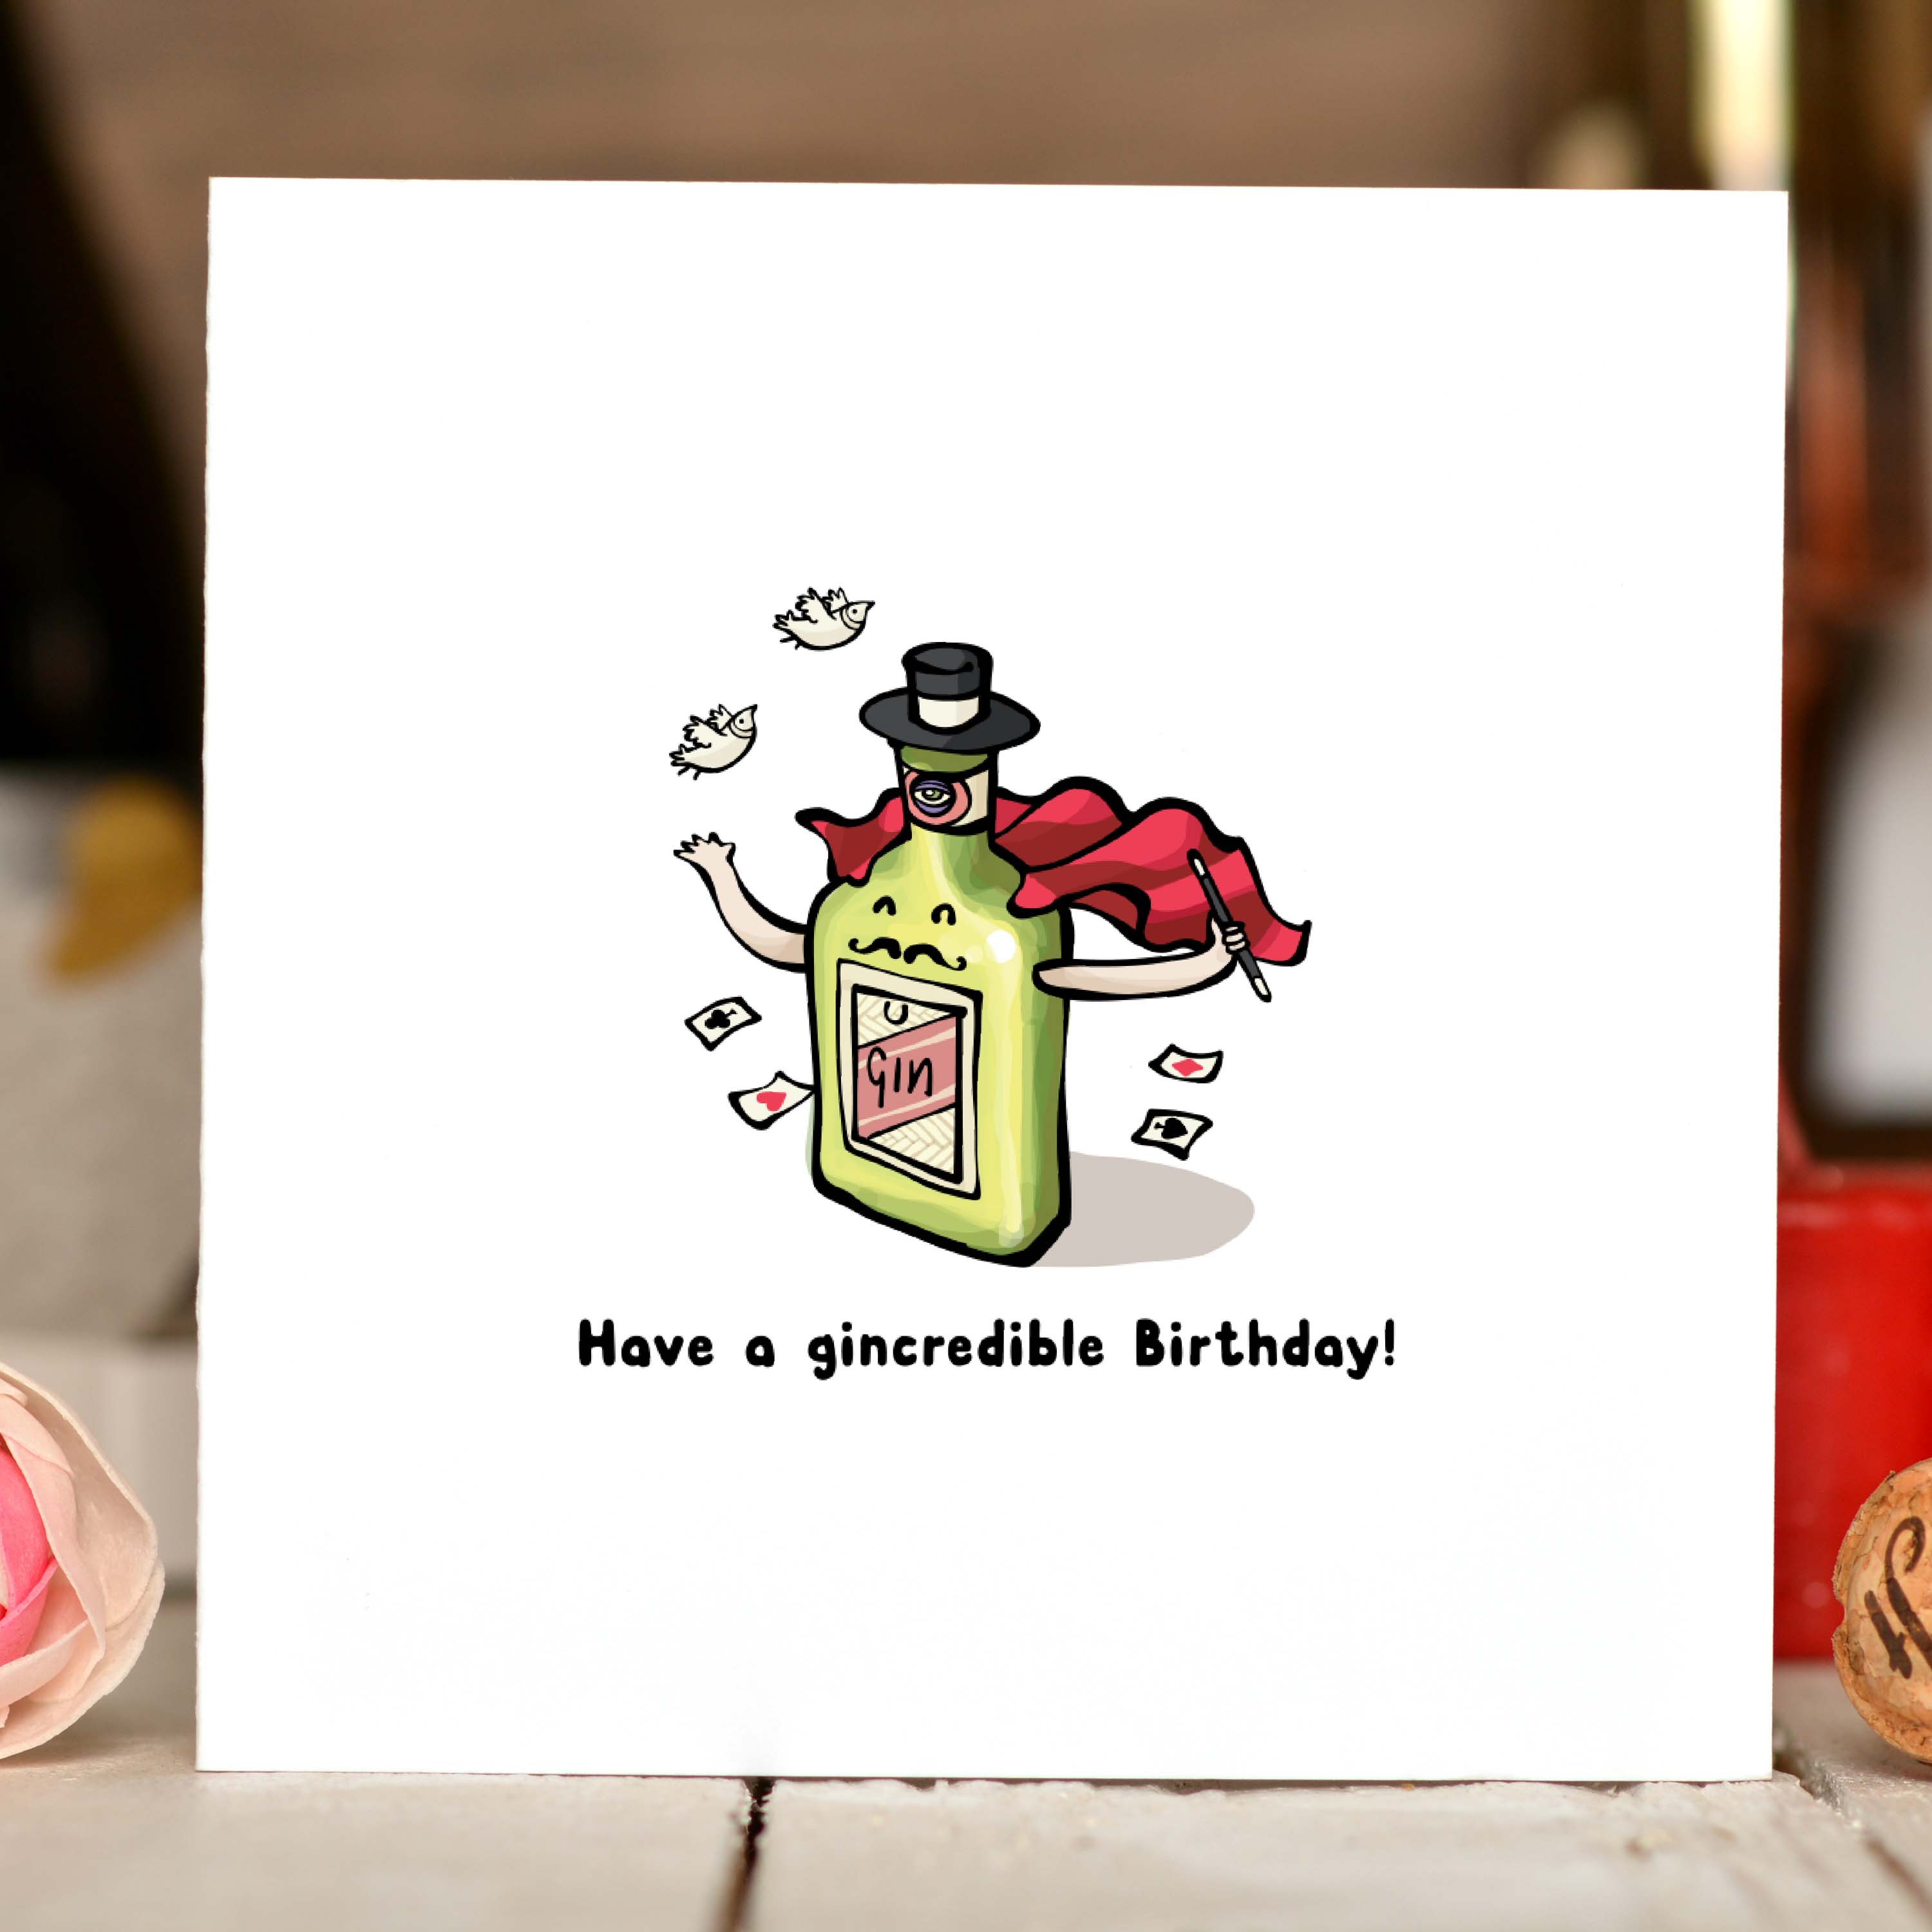 Have a gincredible Birthday Card